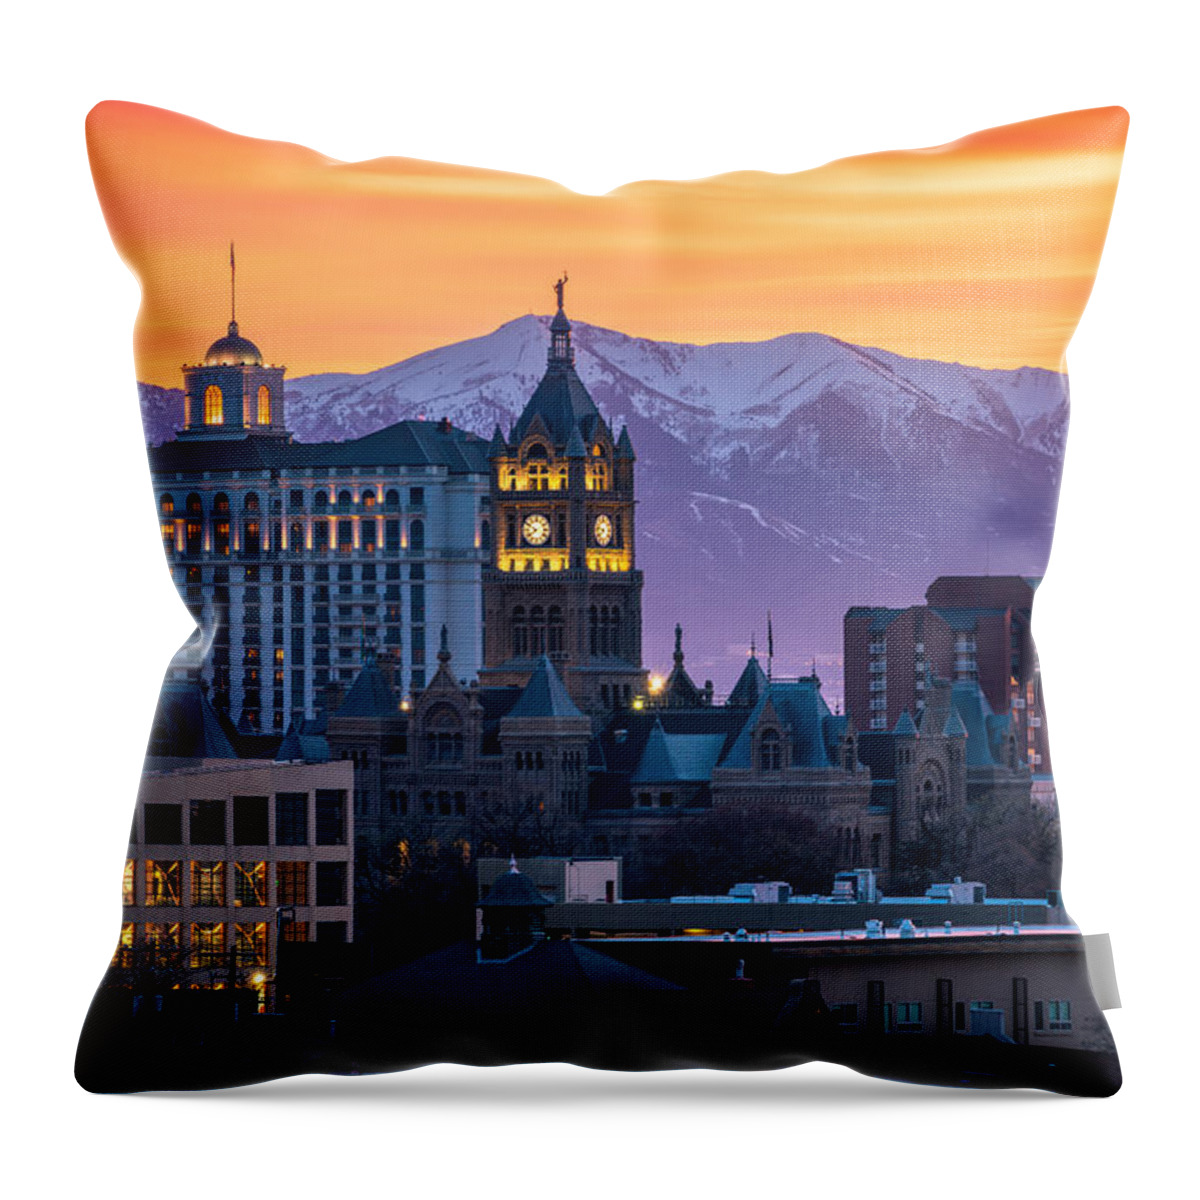 Salt Lake City Throw Pillow featuring the photograph Salt Lake City Hall at Sunset by James Udall